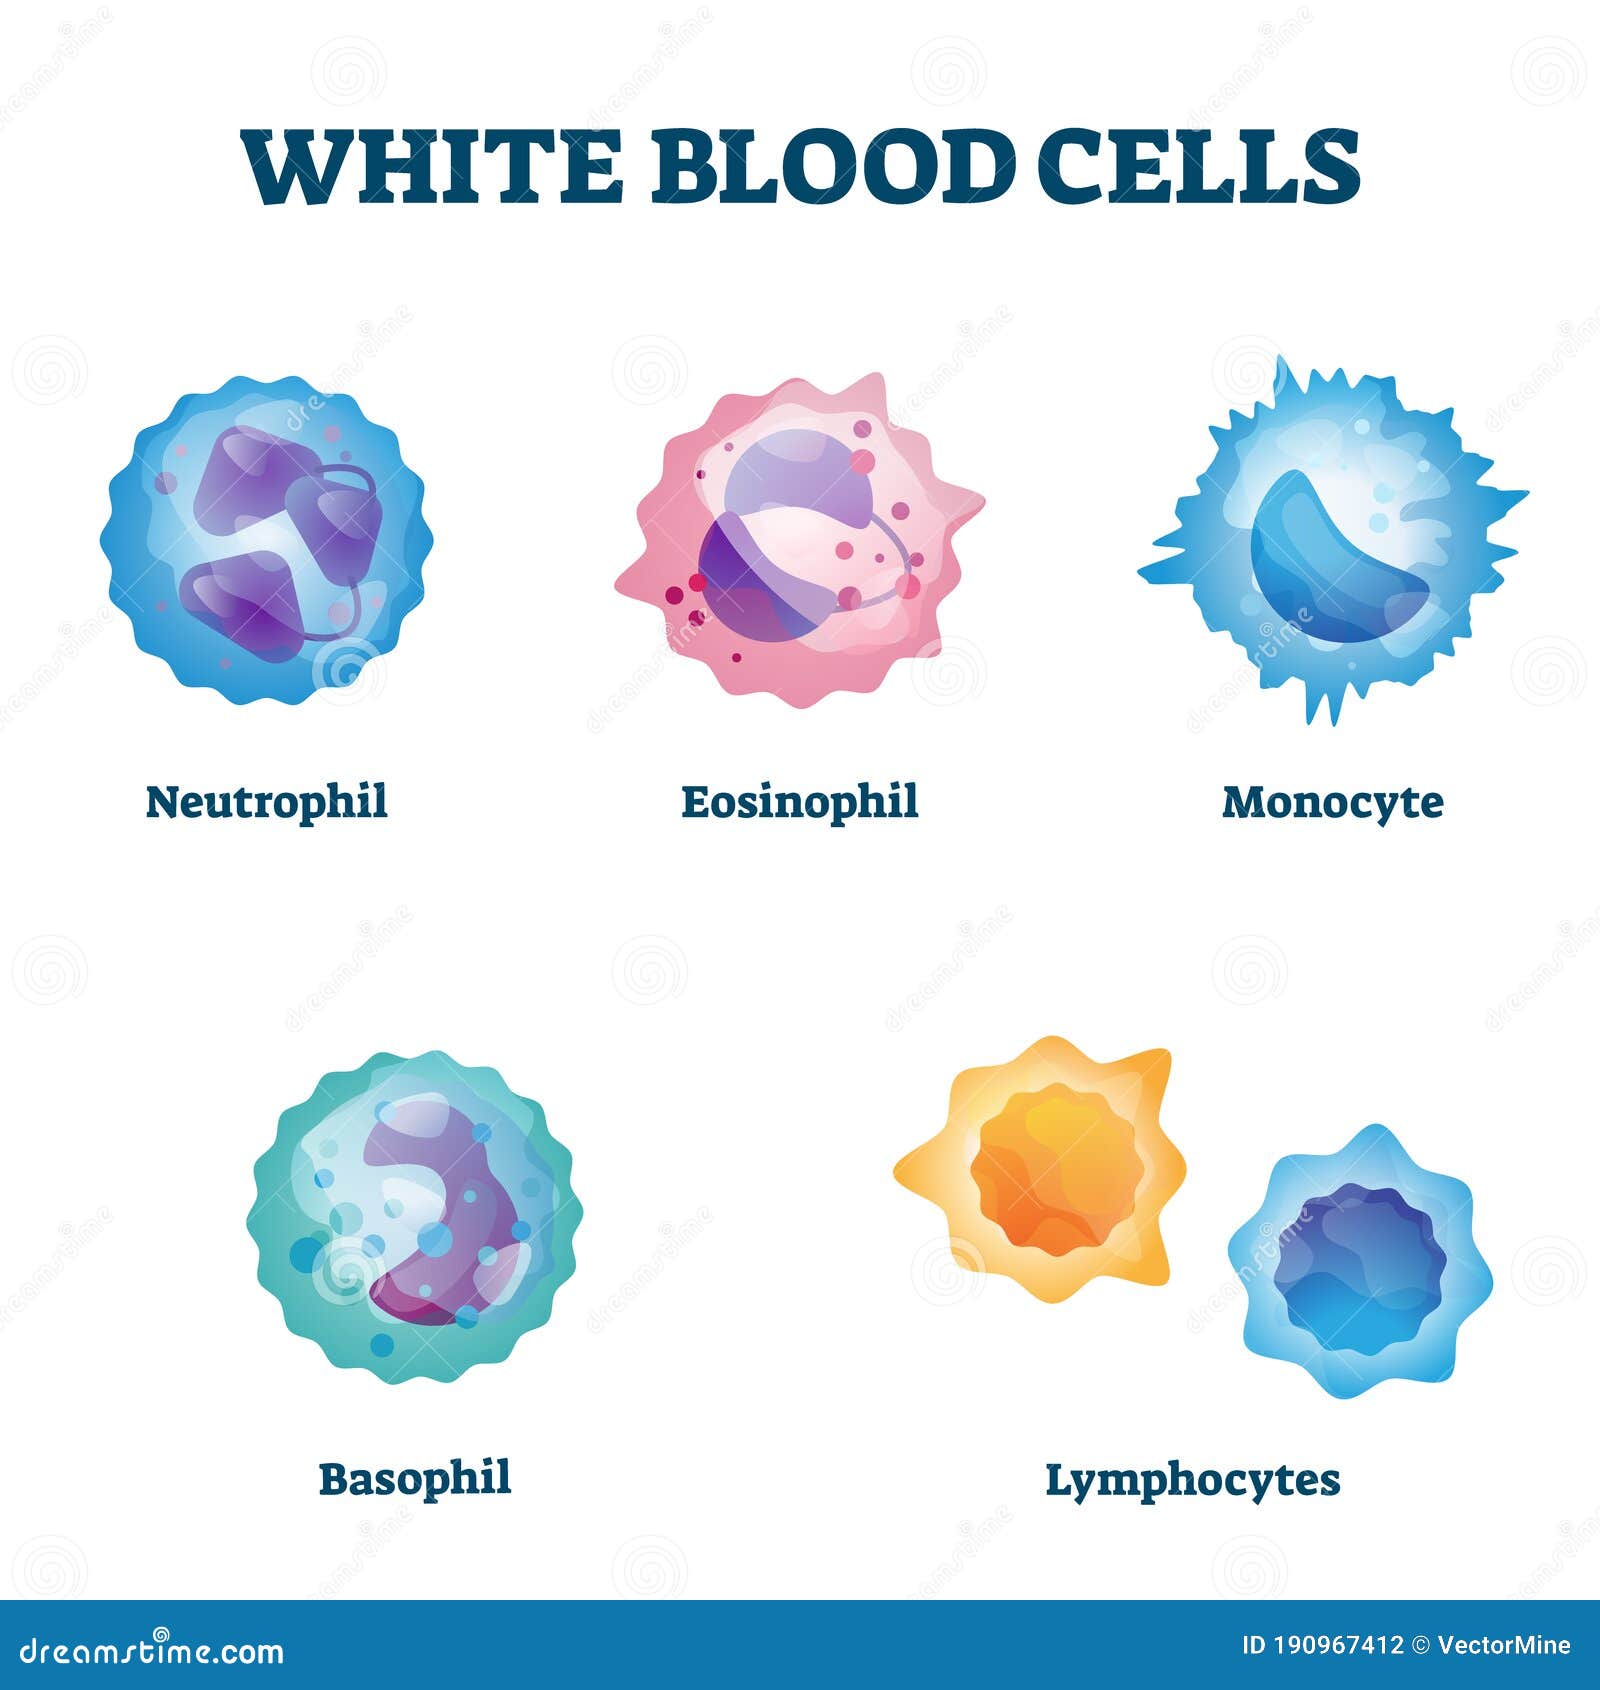 White Blood Cells Flow Chart